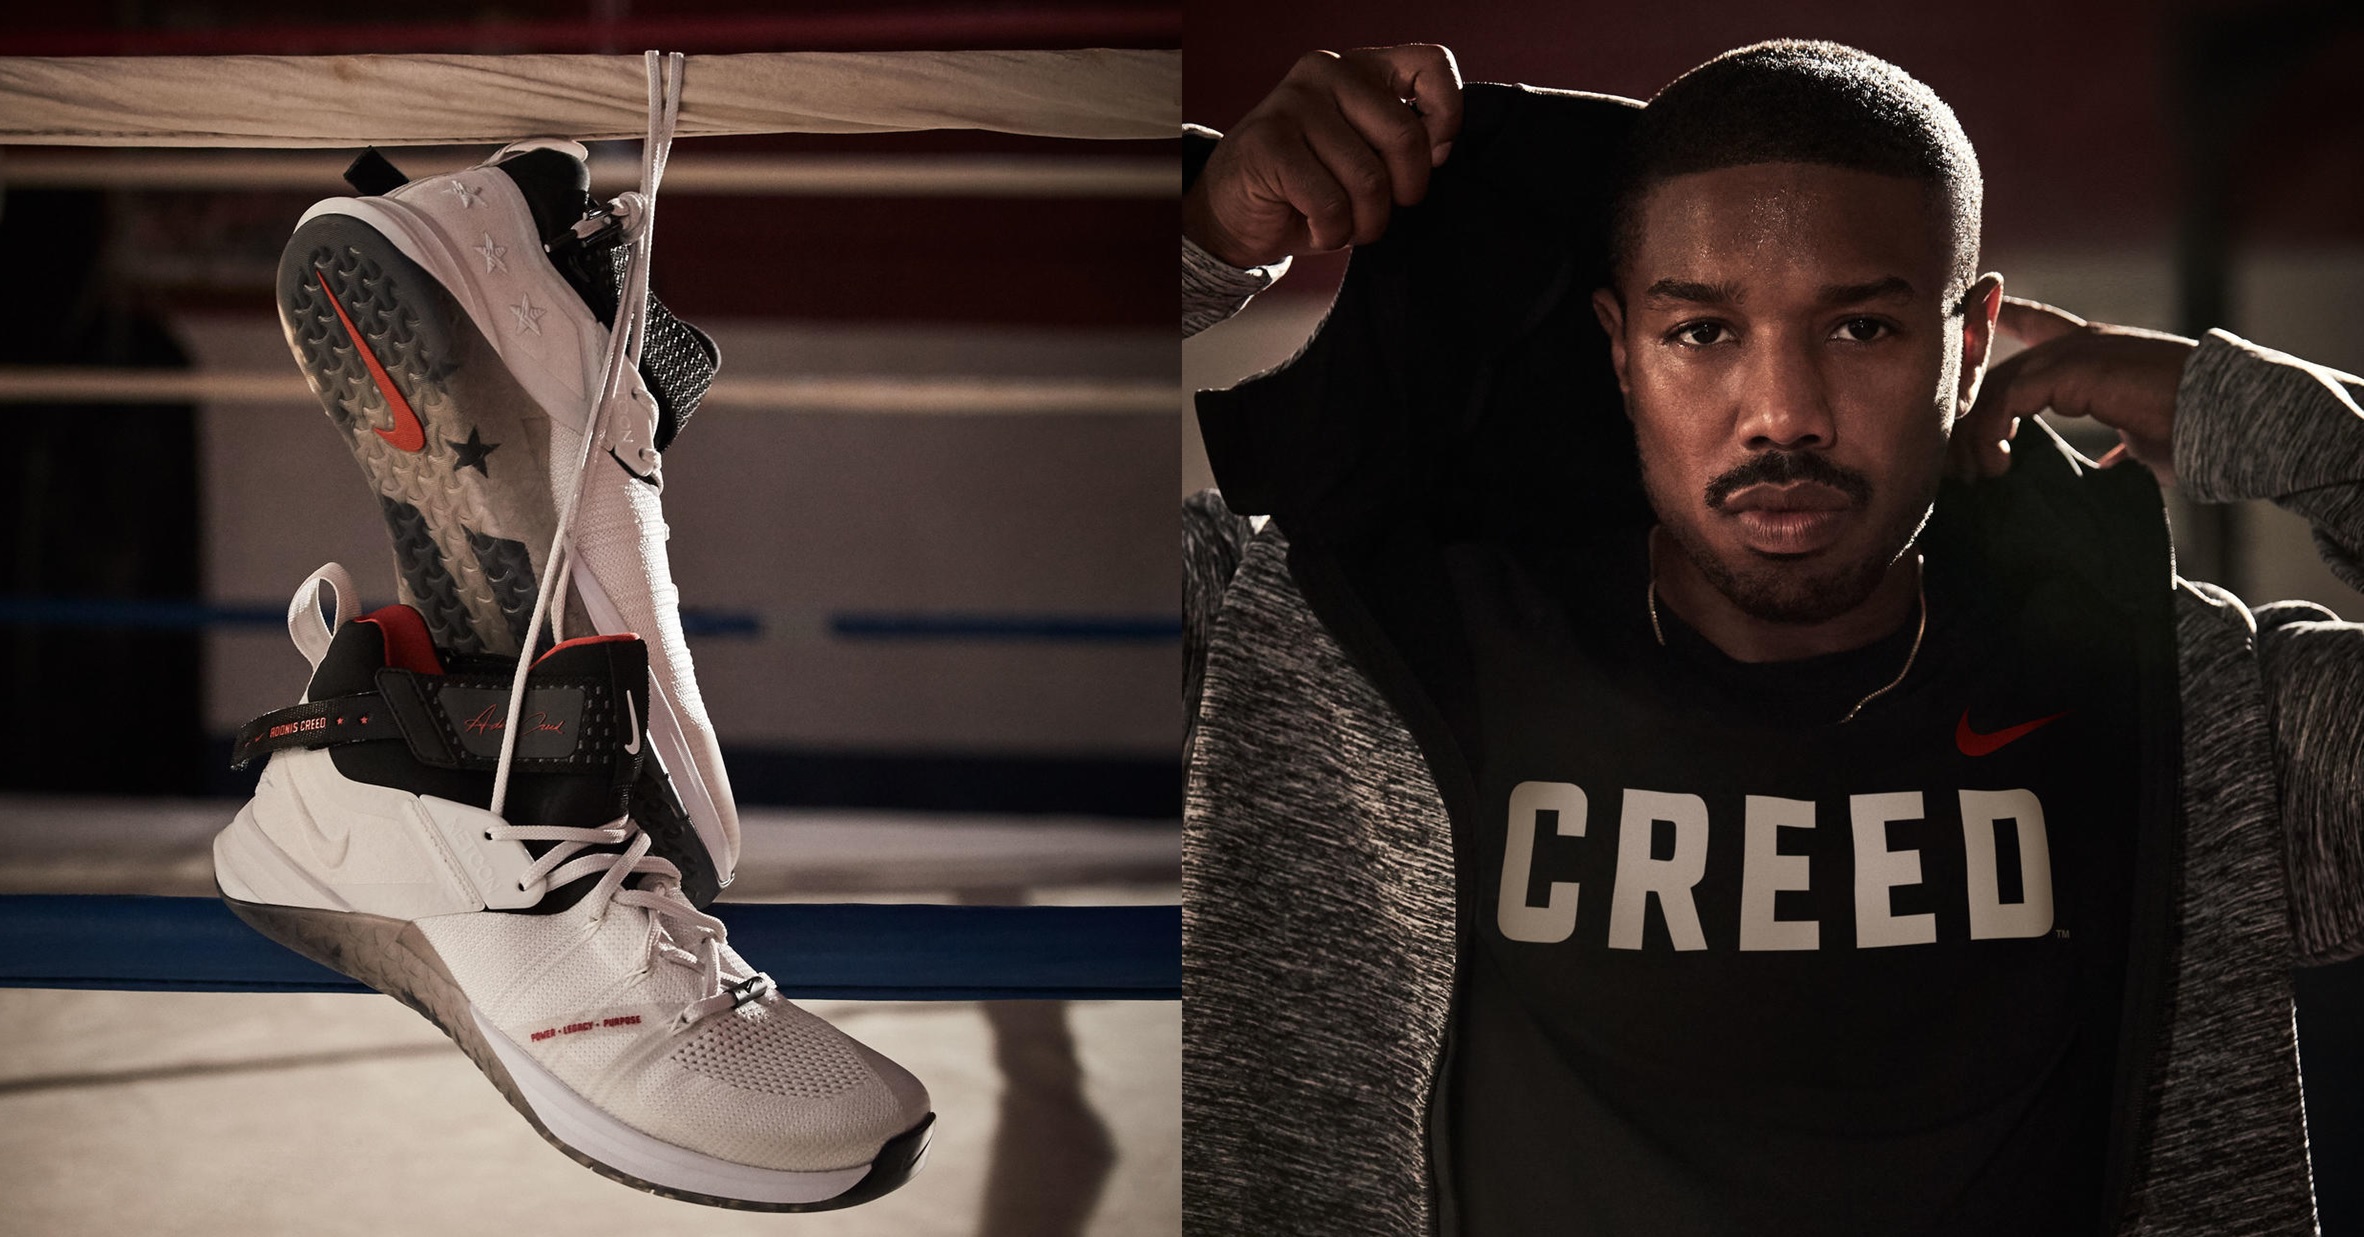 creed nike collection